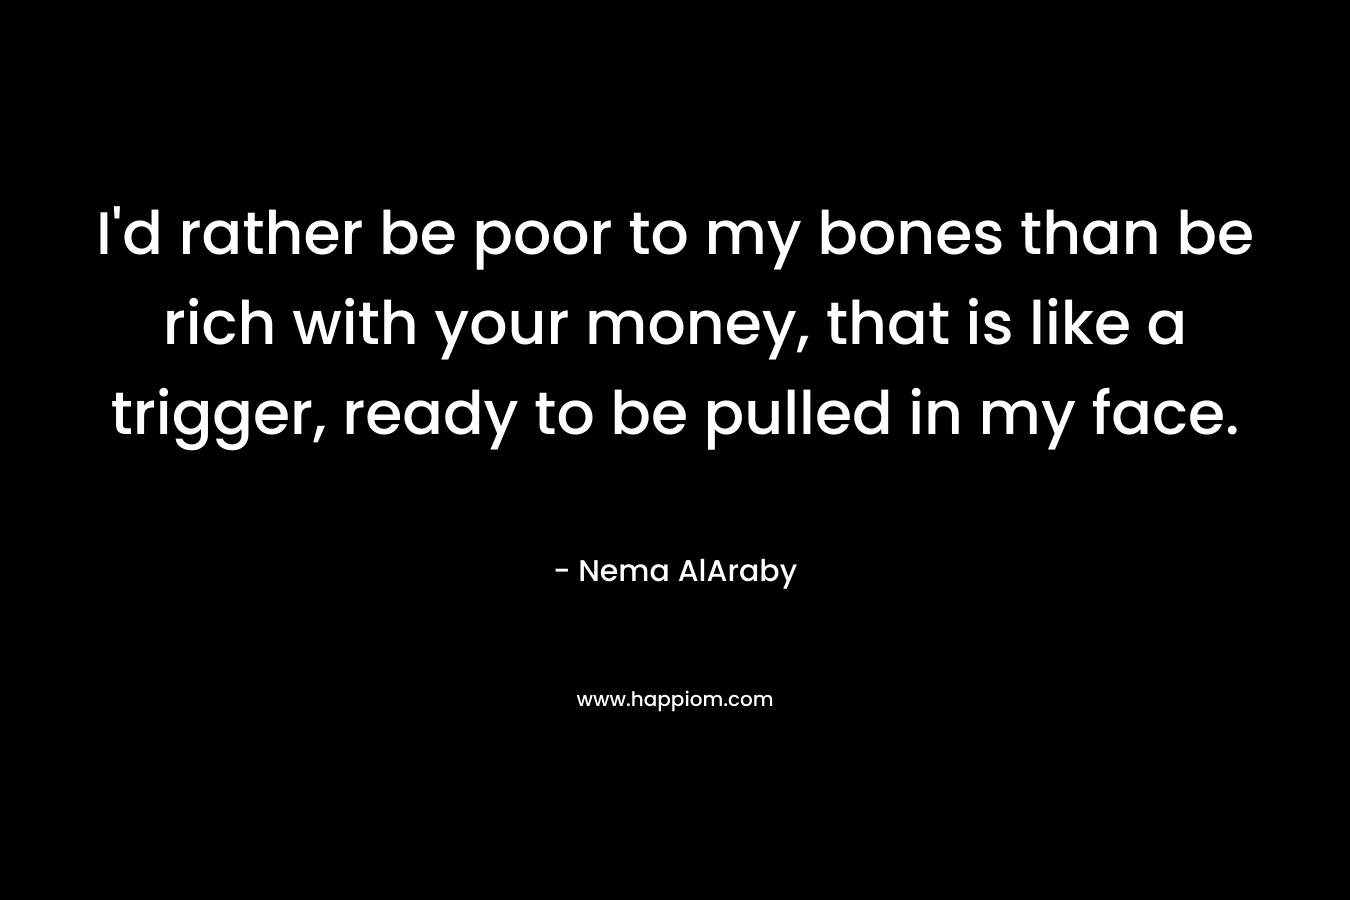 I’d rather be poor to my bones than be rich with your money, that is like a trigger, ready to be pulled in my face. – Nema AlAraby